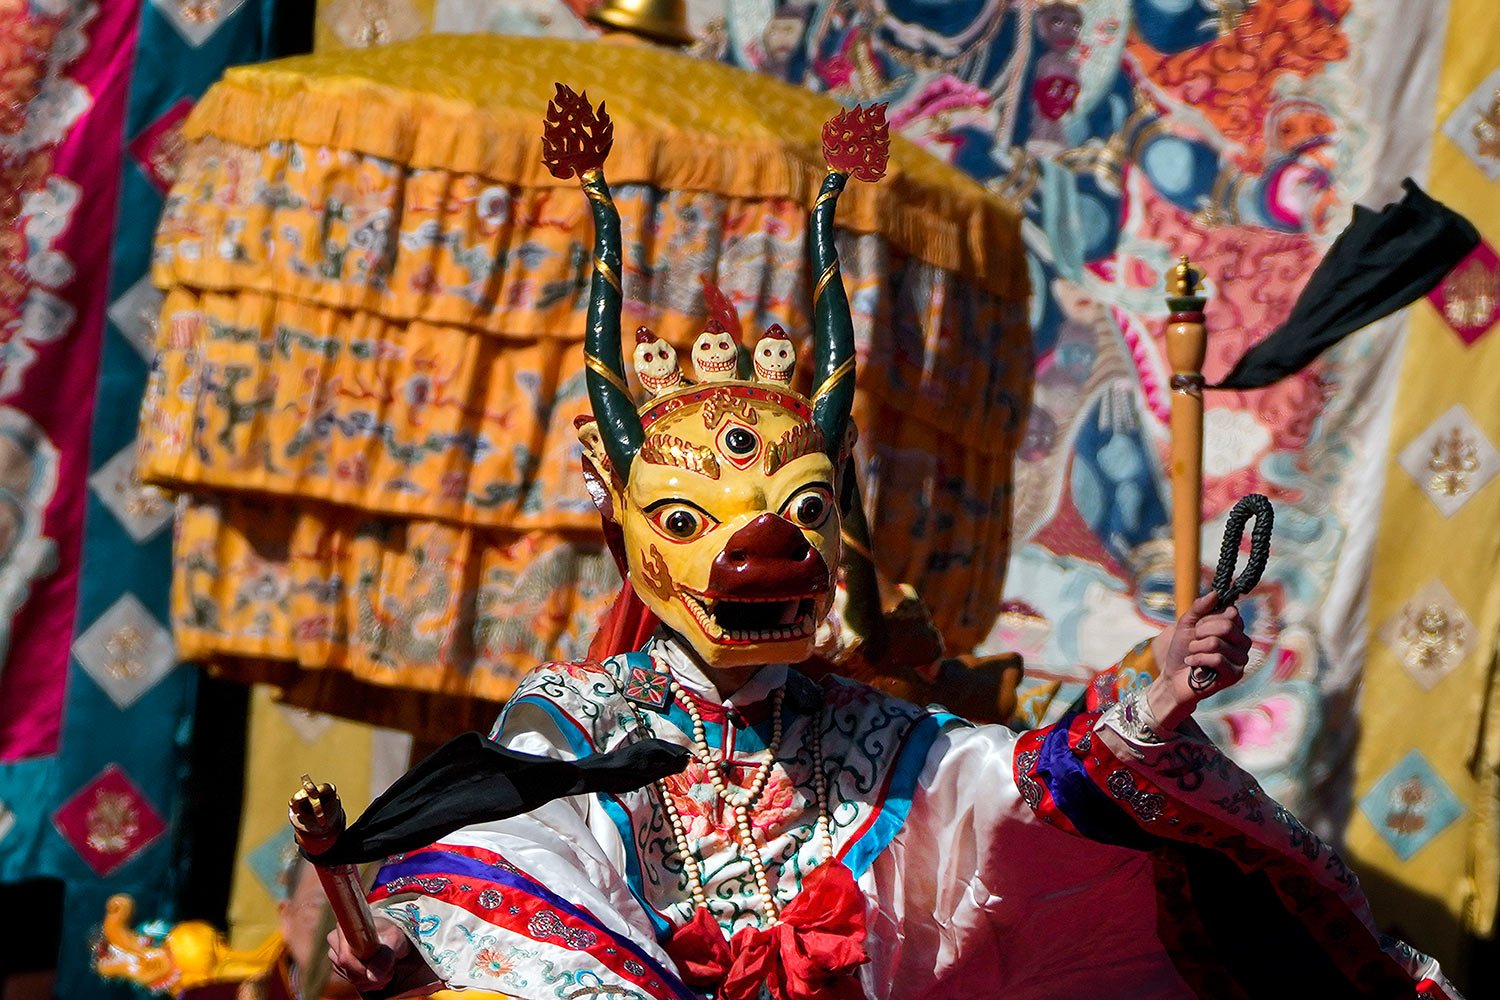  A Tibetan monk in a ghoulish costume performs during a ceremony to chase away the "demon king" to bring peace and happiness for the Tibetan New Year at the Yonghegong Lama Temple in Beijing, Sunday, Feb. 19, 2023.  (AP Photo/Andy Wong) 